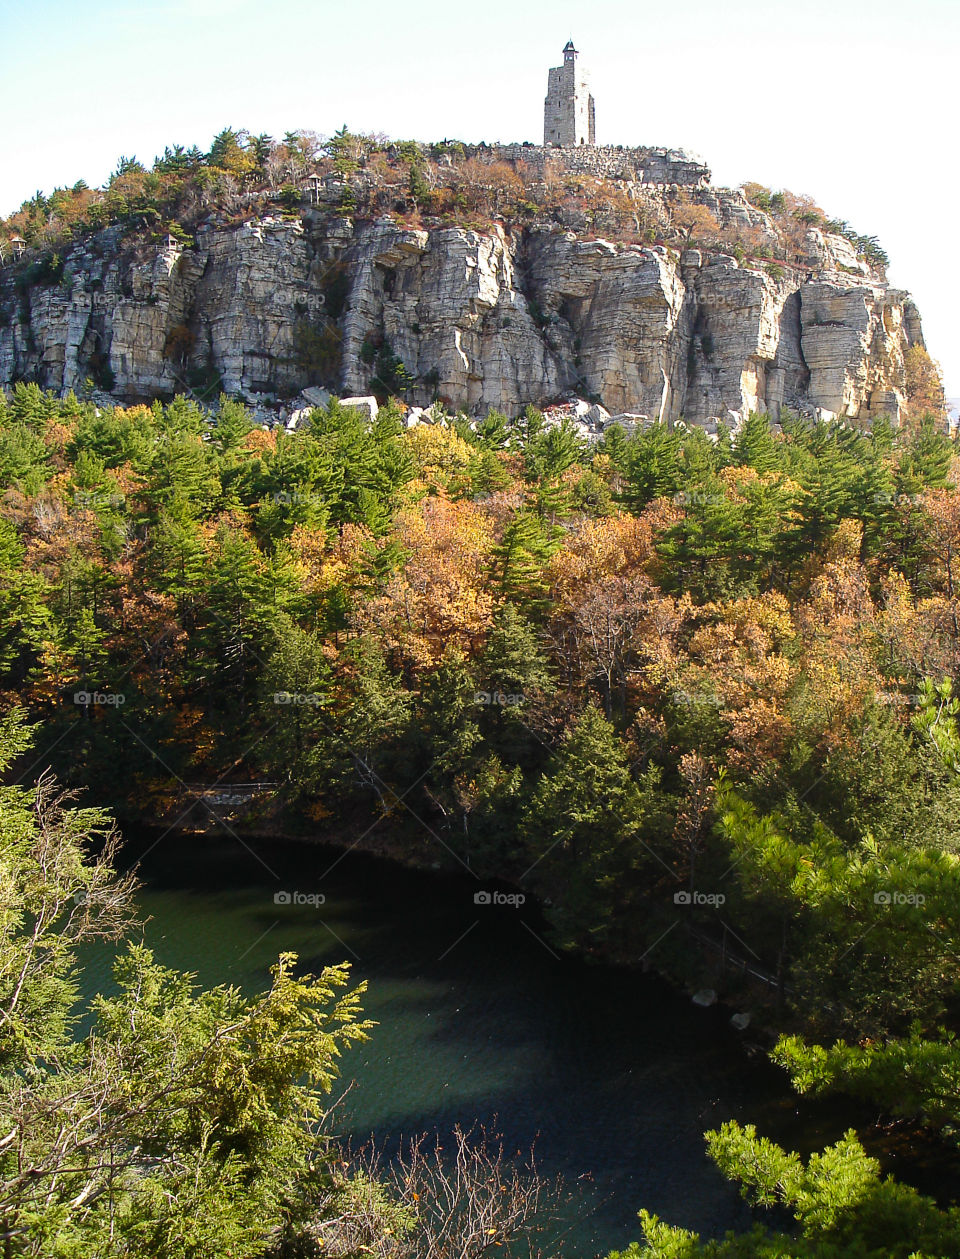 Along the trail to the Mohonk Preserve